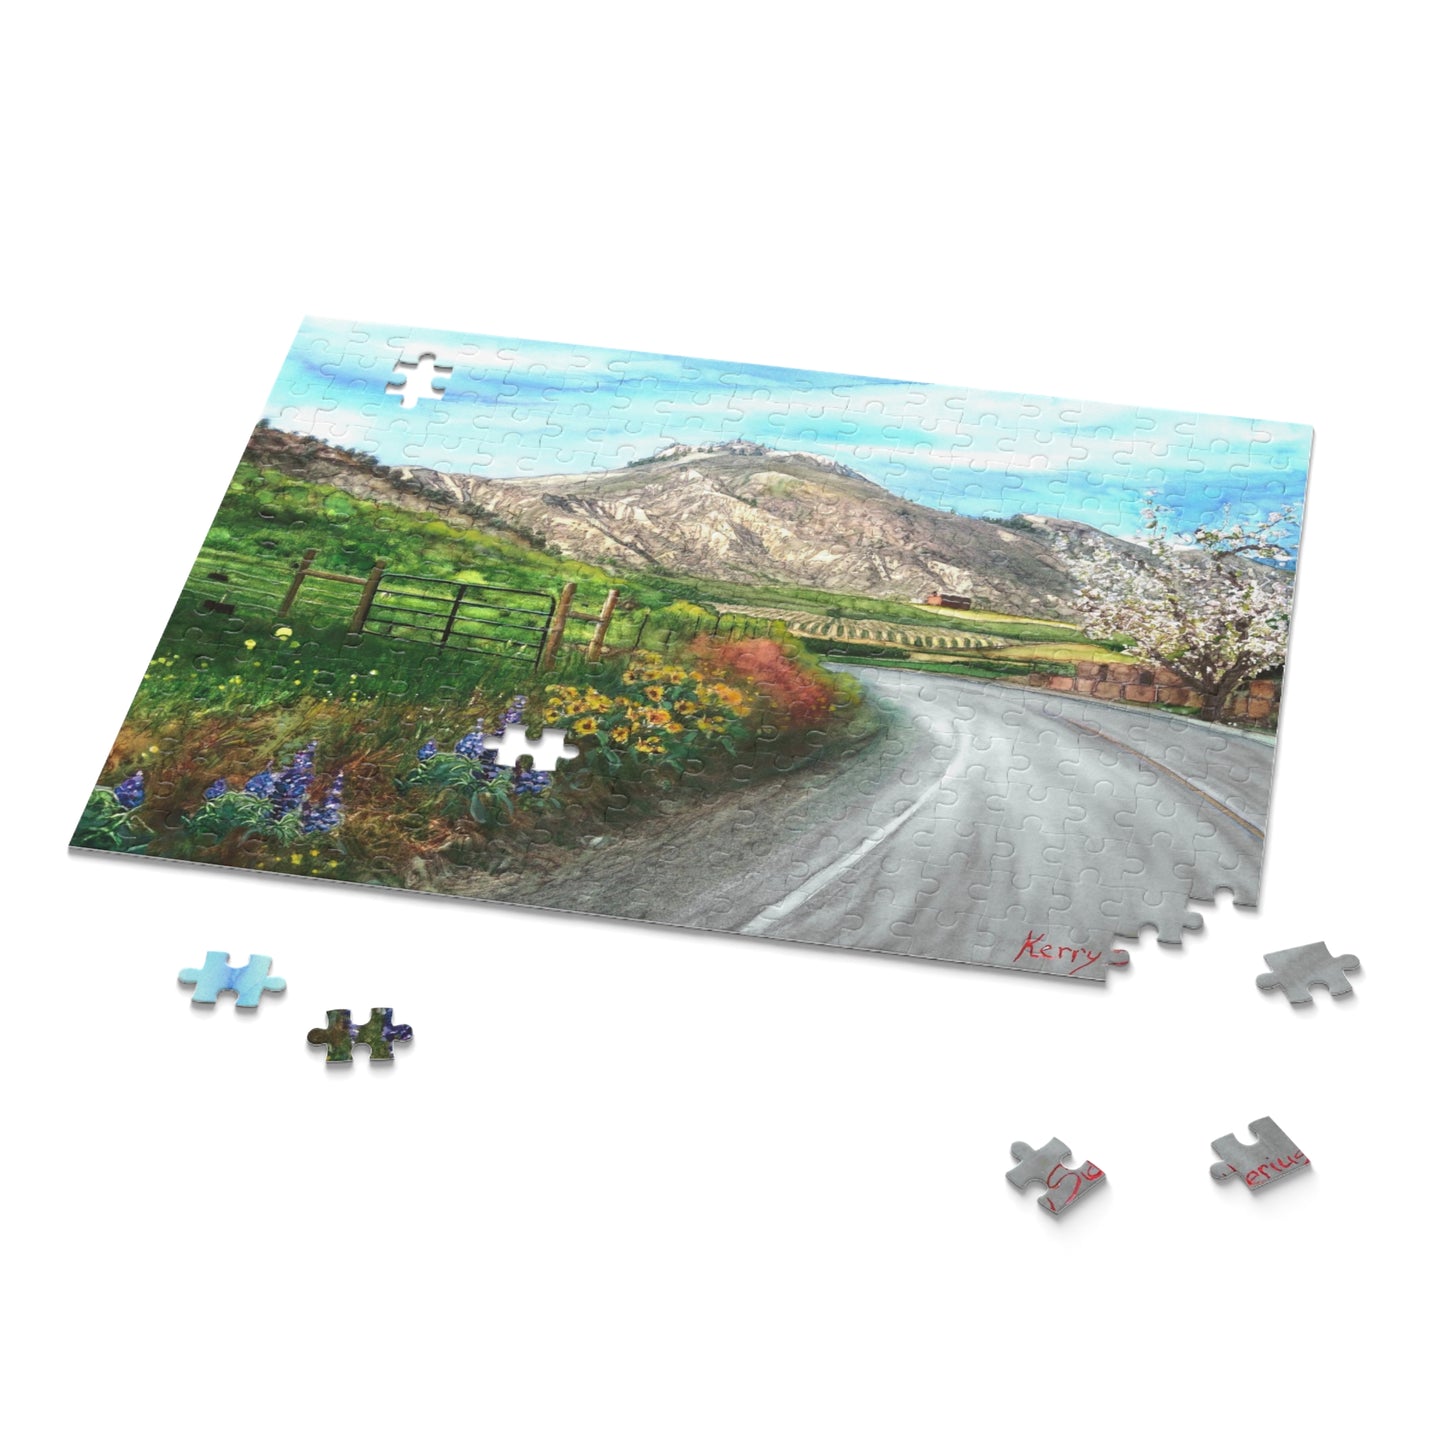 "The Road Home" Puzzle (252 Piece) - Kerry Siderius Art 